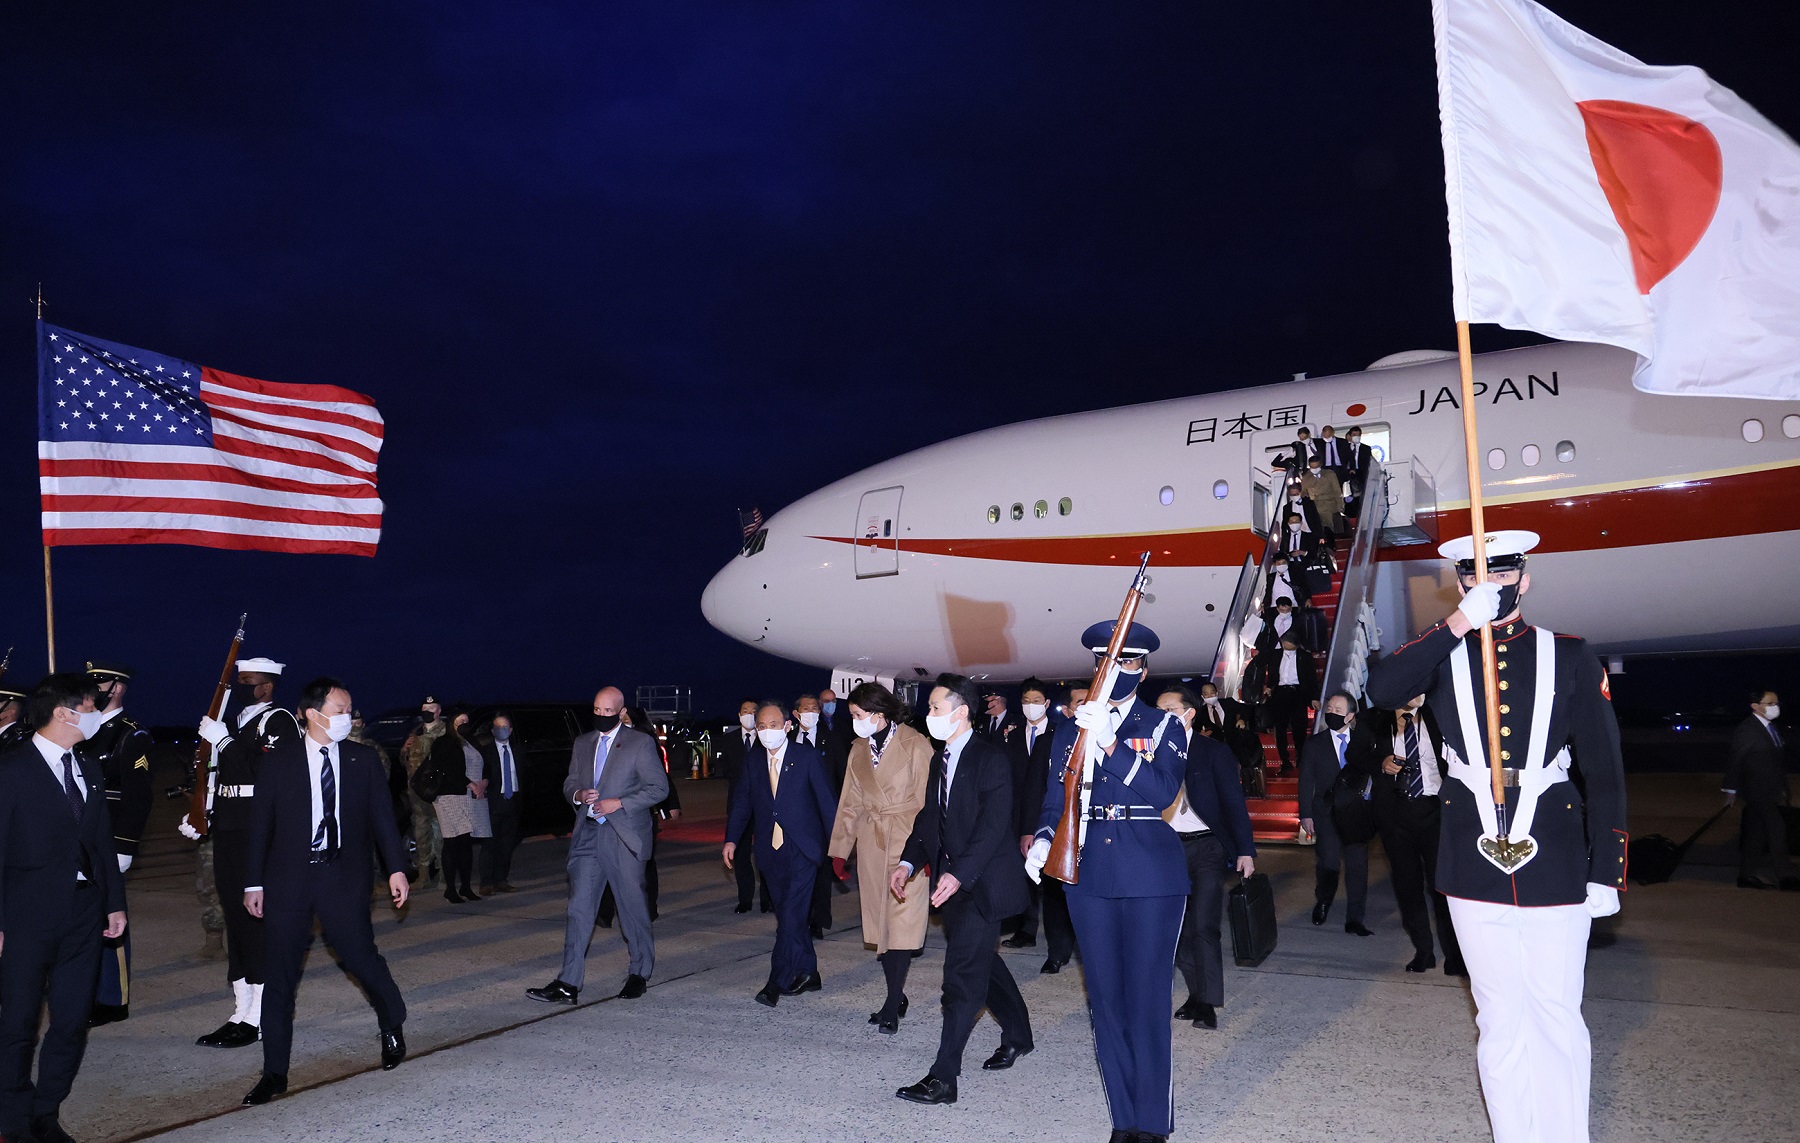 Photograph of the Prime Minister arriving in the United States (2)